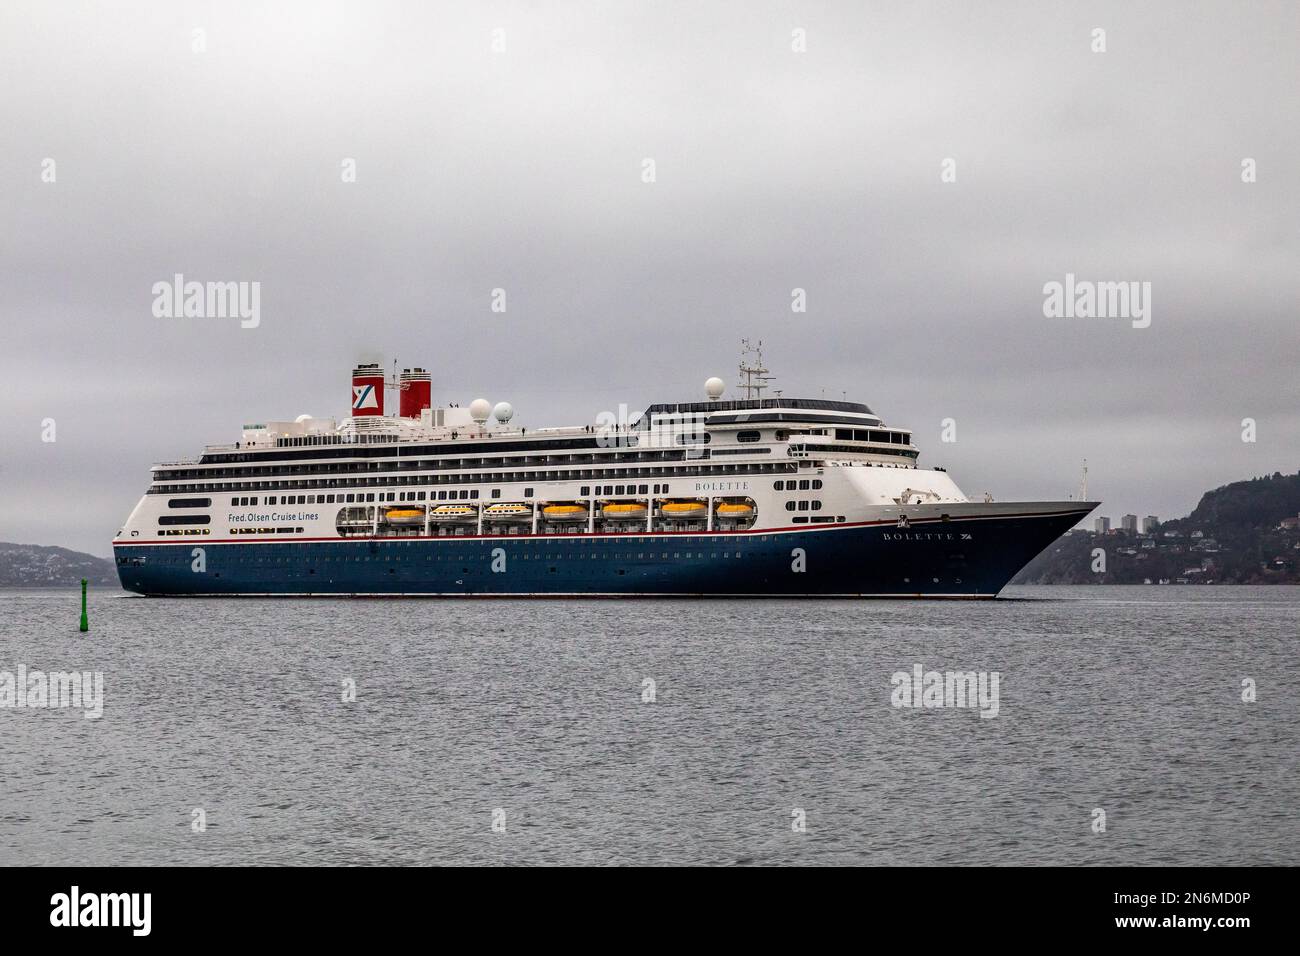 Cruise ship Bolette at Byfjorden, arriving at the port of Bergen, Norway. Stock Photo